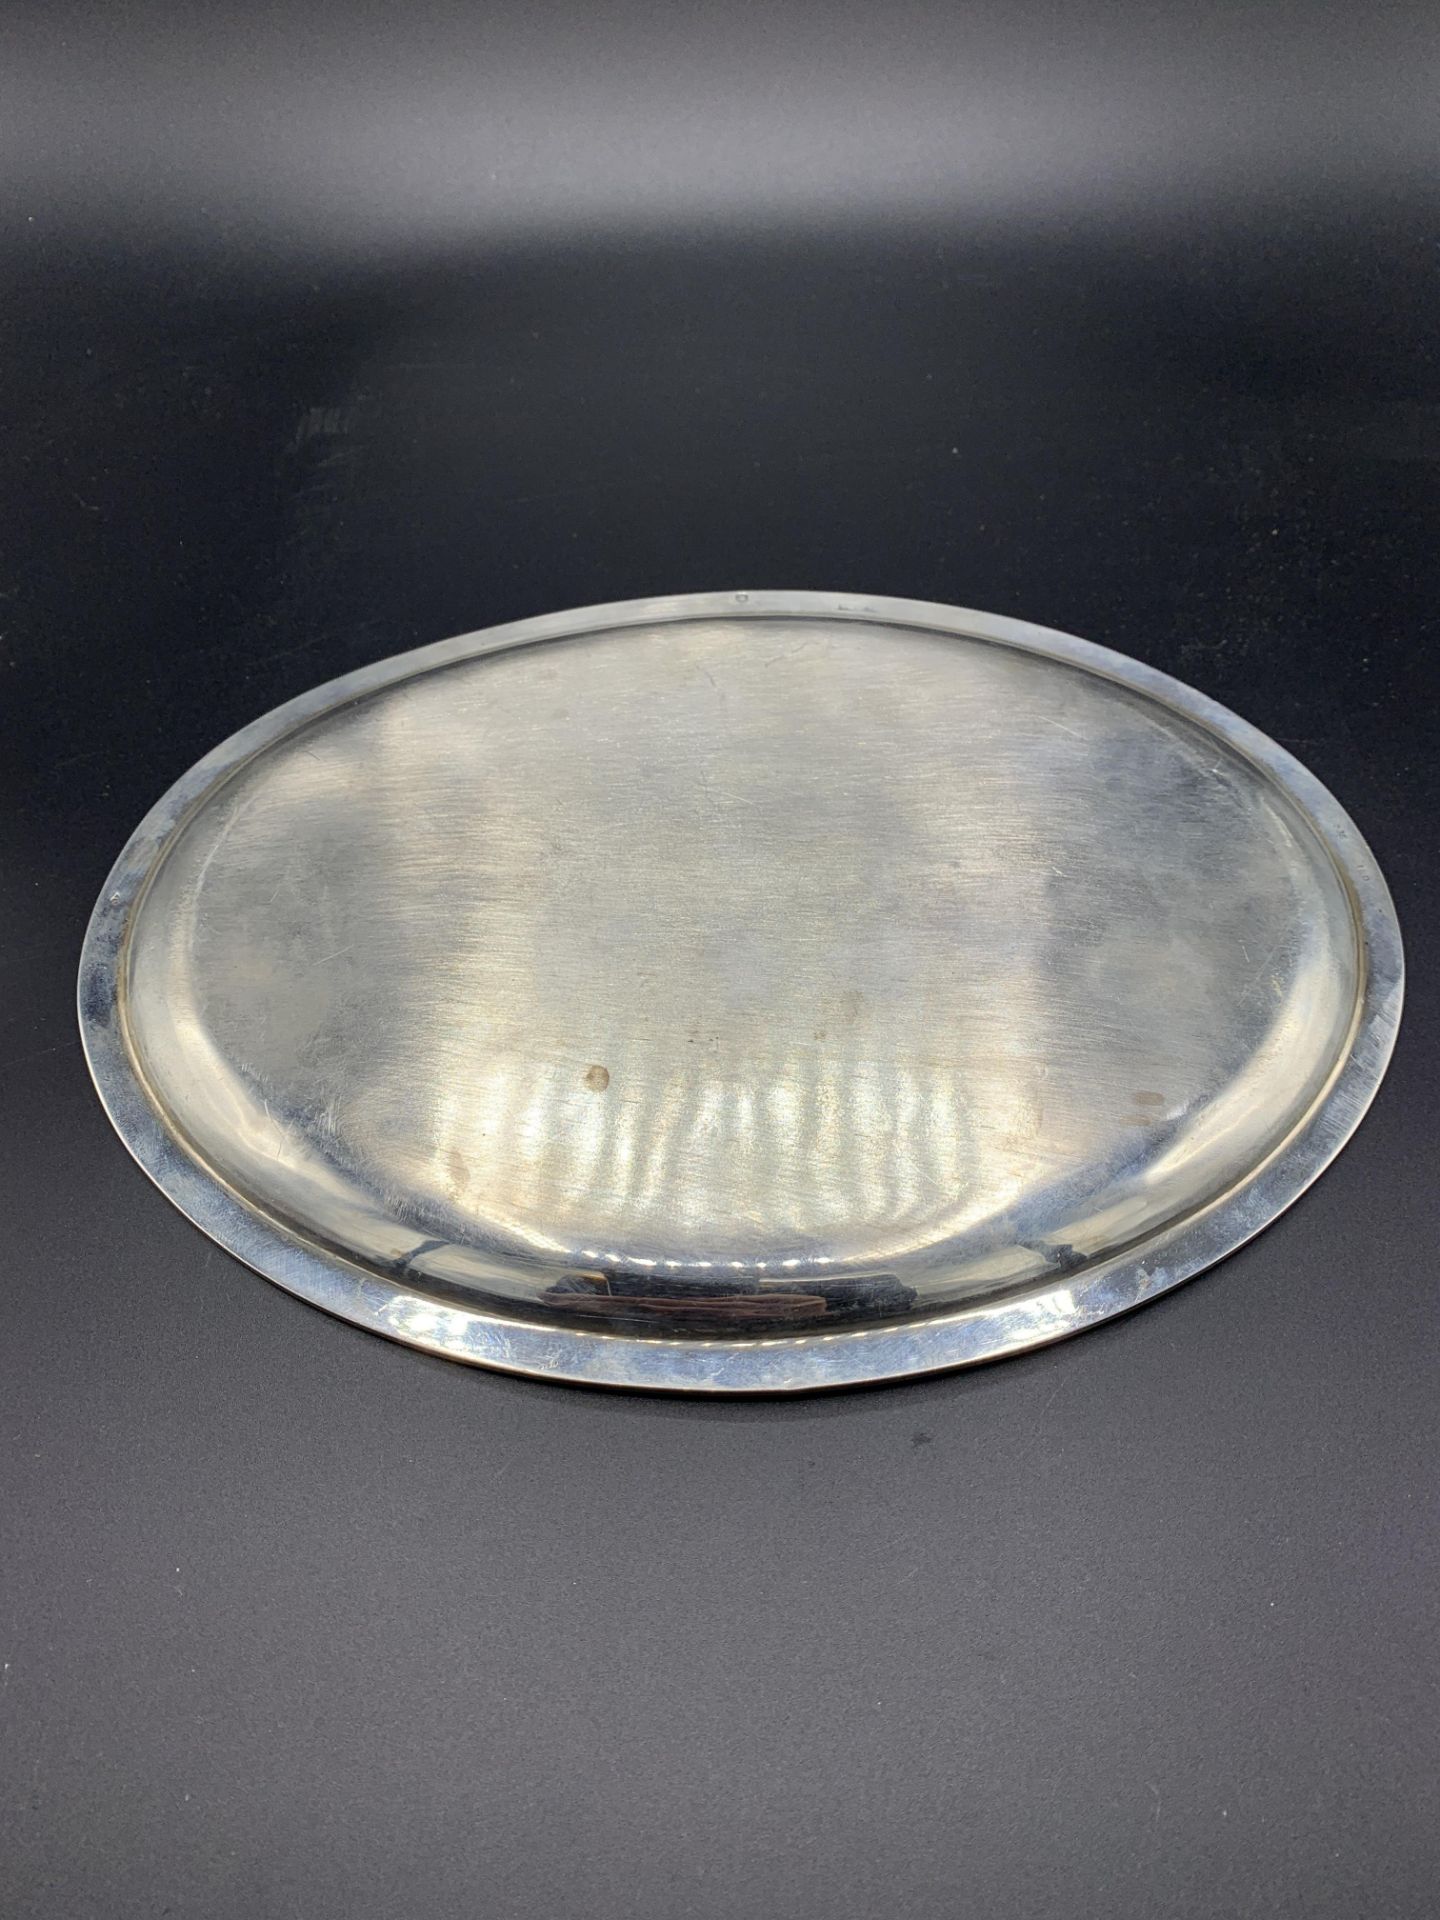 Early 20th century French silver salver - Image 2 of 3